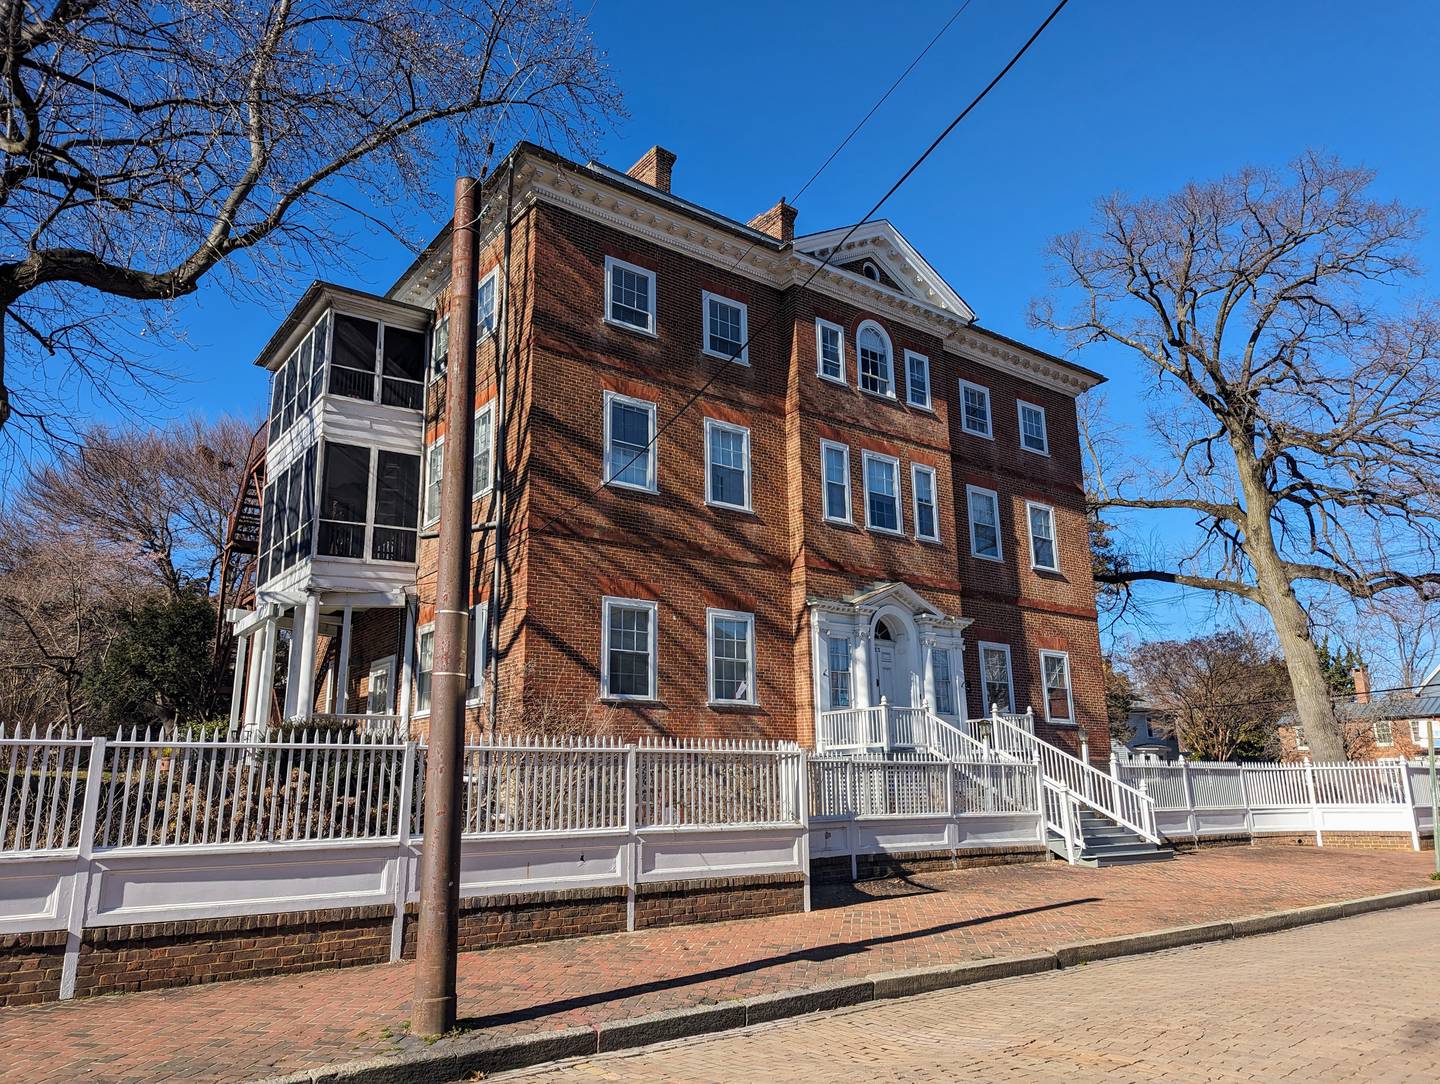 The Chase Lloyd House in Annapolis is on the National Register of Historic Landmarks, the first three-story brick Georgian in North America. It's long history as a women's shelter may be coming to and end.